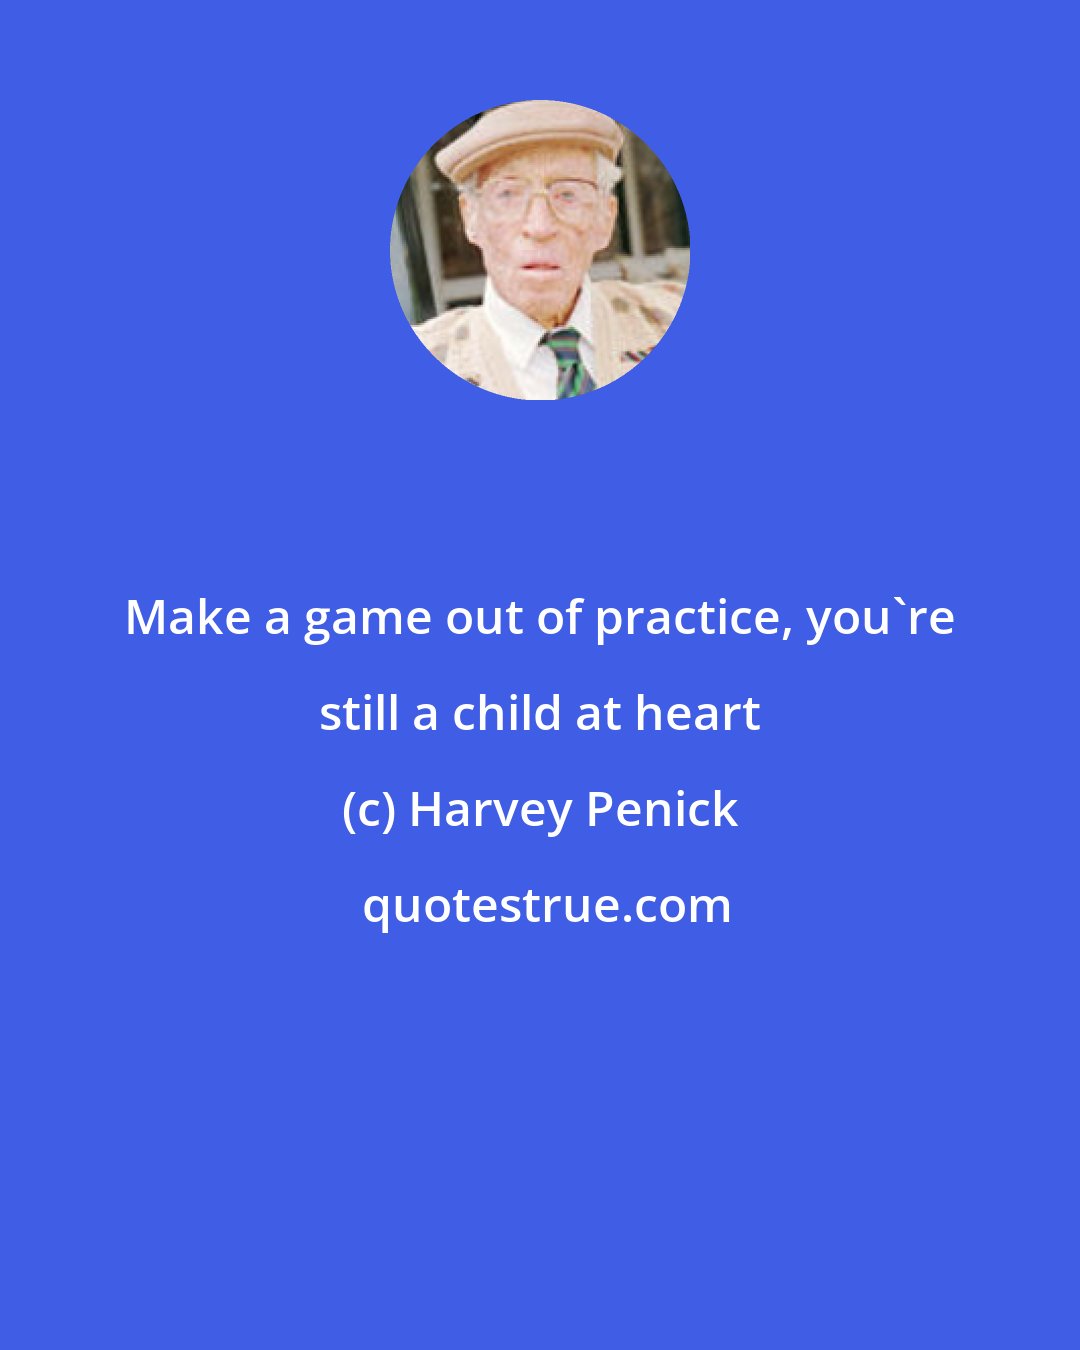 Harvey Penick: Make a game out of practice, you're still a child at heart